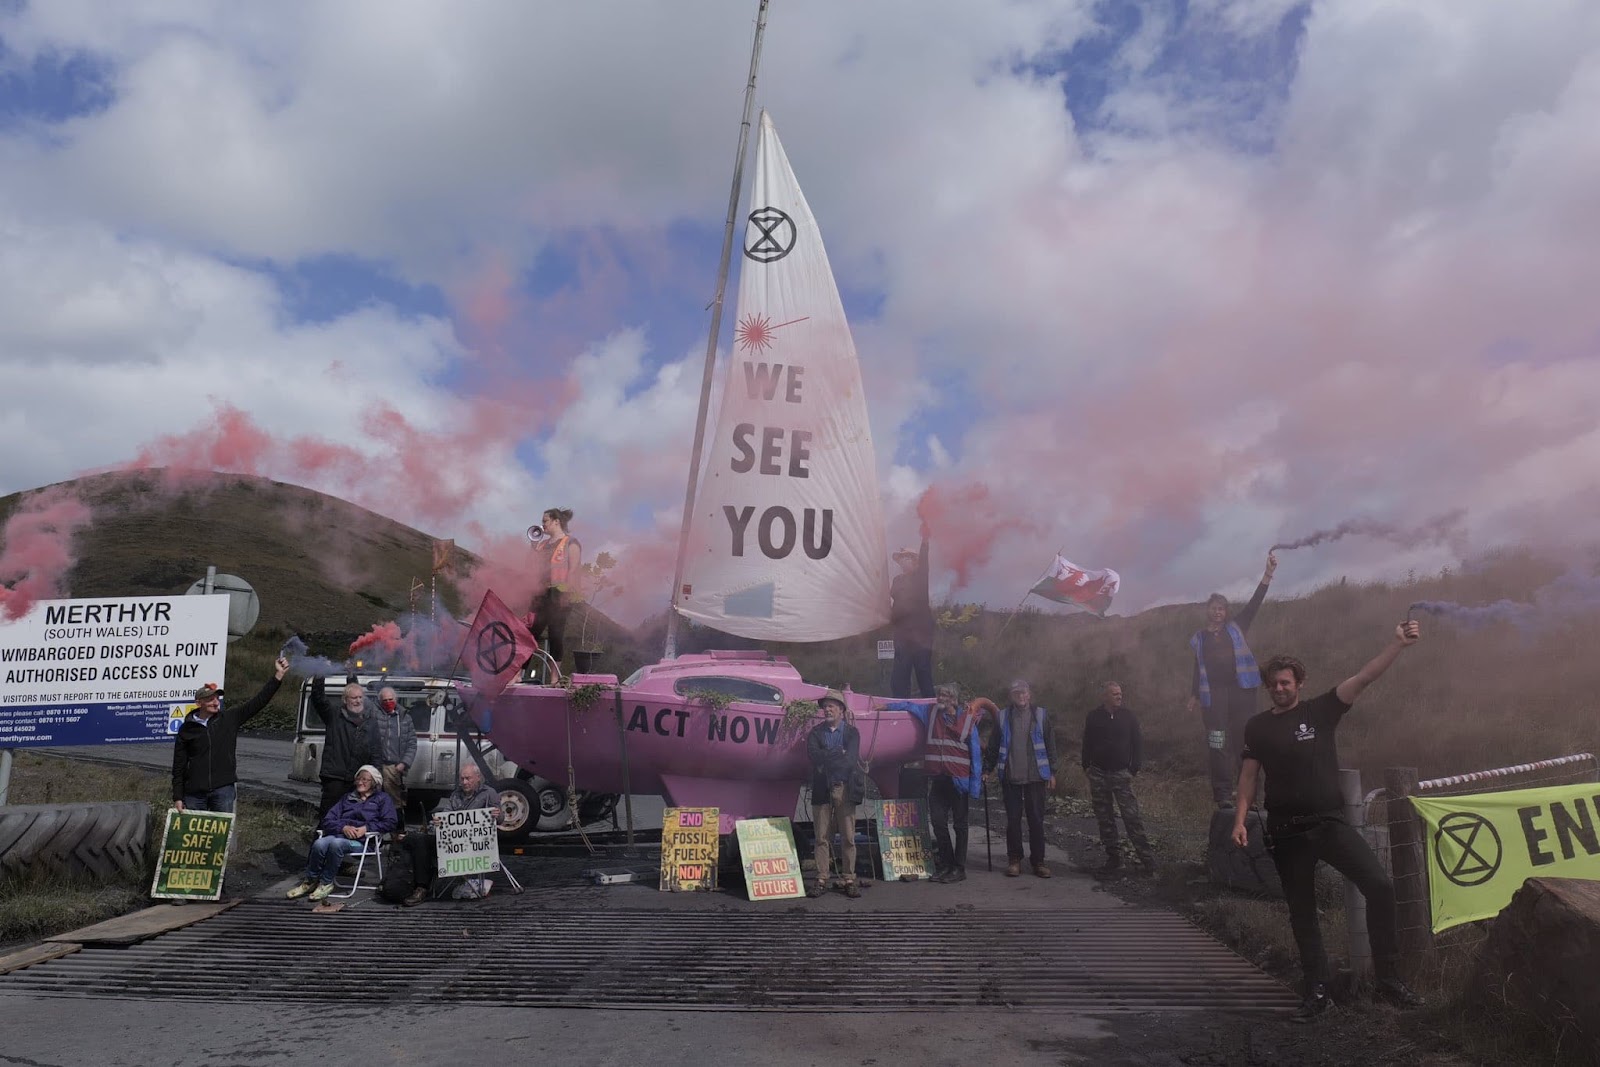 A rebel with a megaphone stands atop the pink boat while rebels let off smoke flares around it